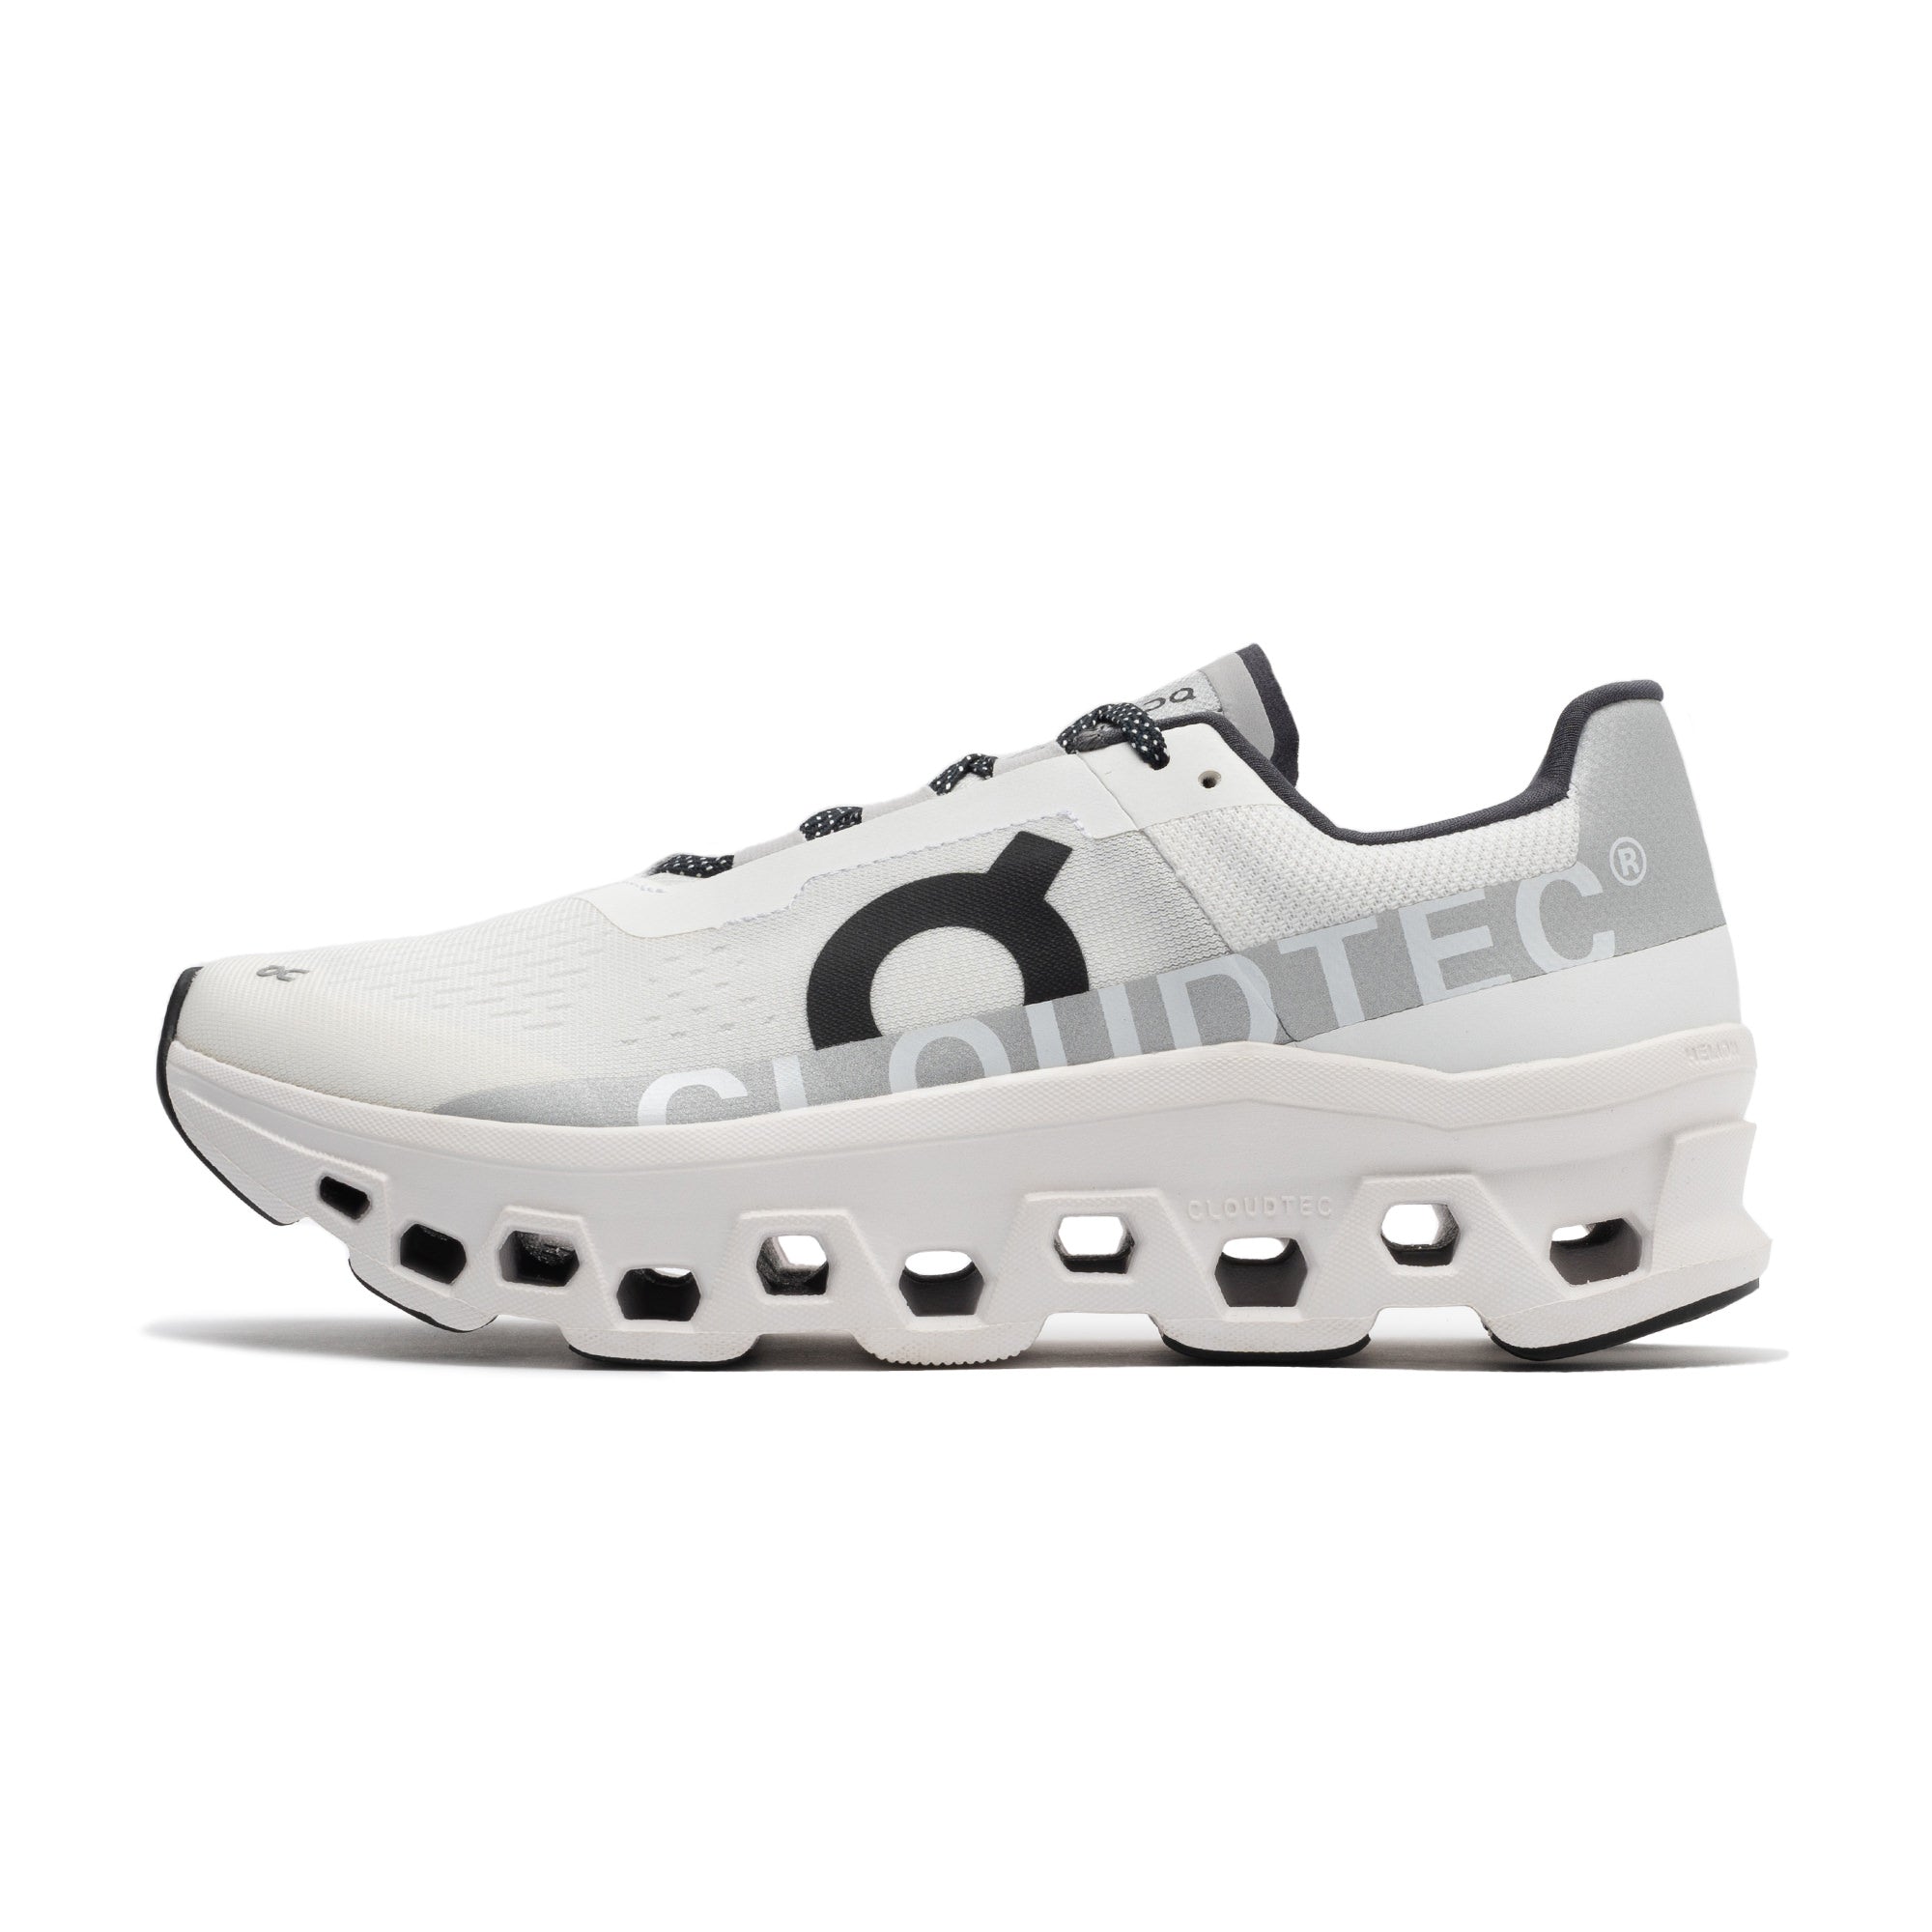 Cloudmonster M 61.98288 Undyed White